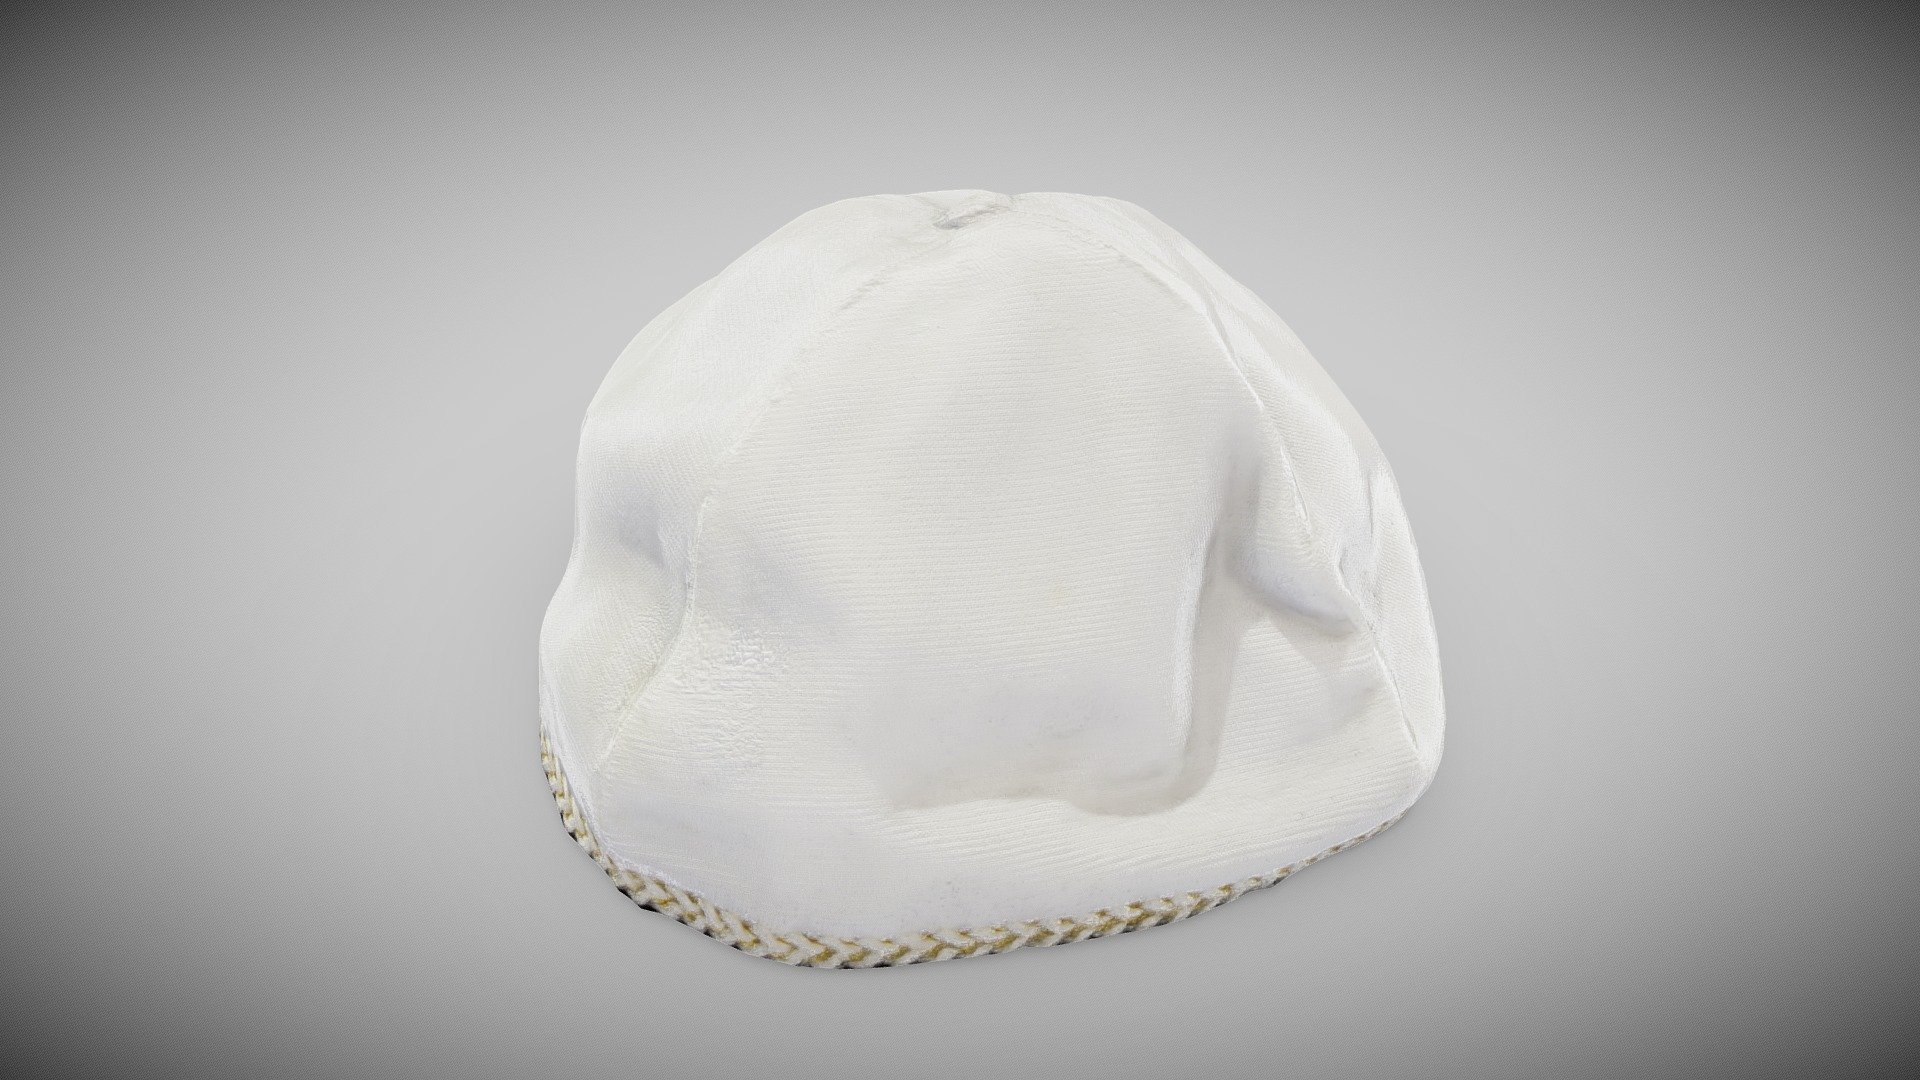 Full name: White kippah from the house of Szymon Kluger in Oświęcim, Poland

Known as a kippah or a yarmulke, it seems to be the most universally recognised symbol of Jewish religiosity and culture.  What is the origin of the custom of wearing this small brimless skullcap by Jewish men atop their head? The practice of covering only the crown of one’s head is not rooted in any Biblical or Talmudic precepts. Instead, its foundation lies in the description of the clothes of a high priest (Exodus 28:4, 36-39) or in the traditional headwear of Talmudic scholars in Babylonia. 

For more images and further information, visit: https://muzea.malopolska.pl/en/lista-obiektow/3008

Inventory number: MZ-335-O

Localisation of the physical object: Auschwitz Jewish Center, Oświęcim, Poland  

Digitalisation: Regional Digitalisation Lab, Małopolska Institute of Culture in Kraków, Poland; “Virtual Museums of Małopolska” project - White kippah from the house of Szymon Kluger - Download Free 3D model by Virtual Museums of Małopolska (@WirtualneMuzeaMalopolski) 3d model